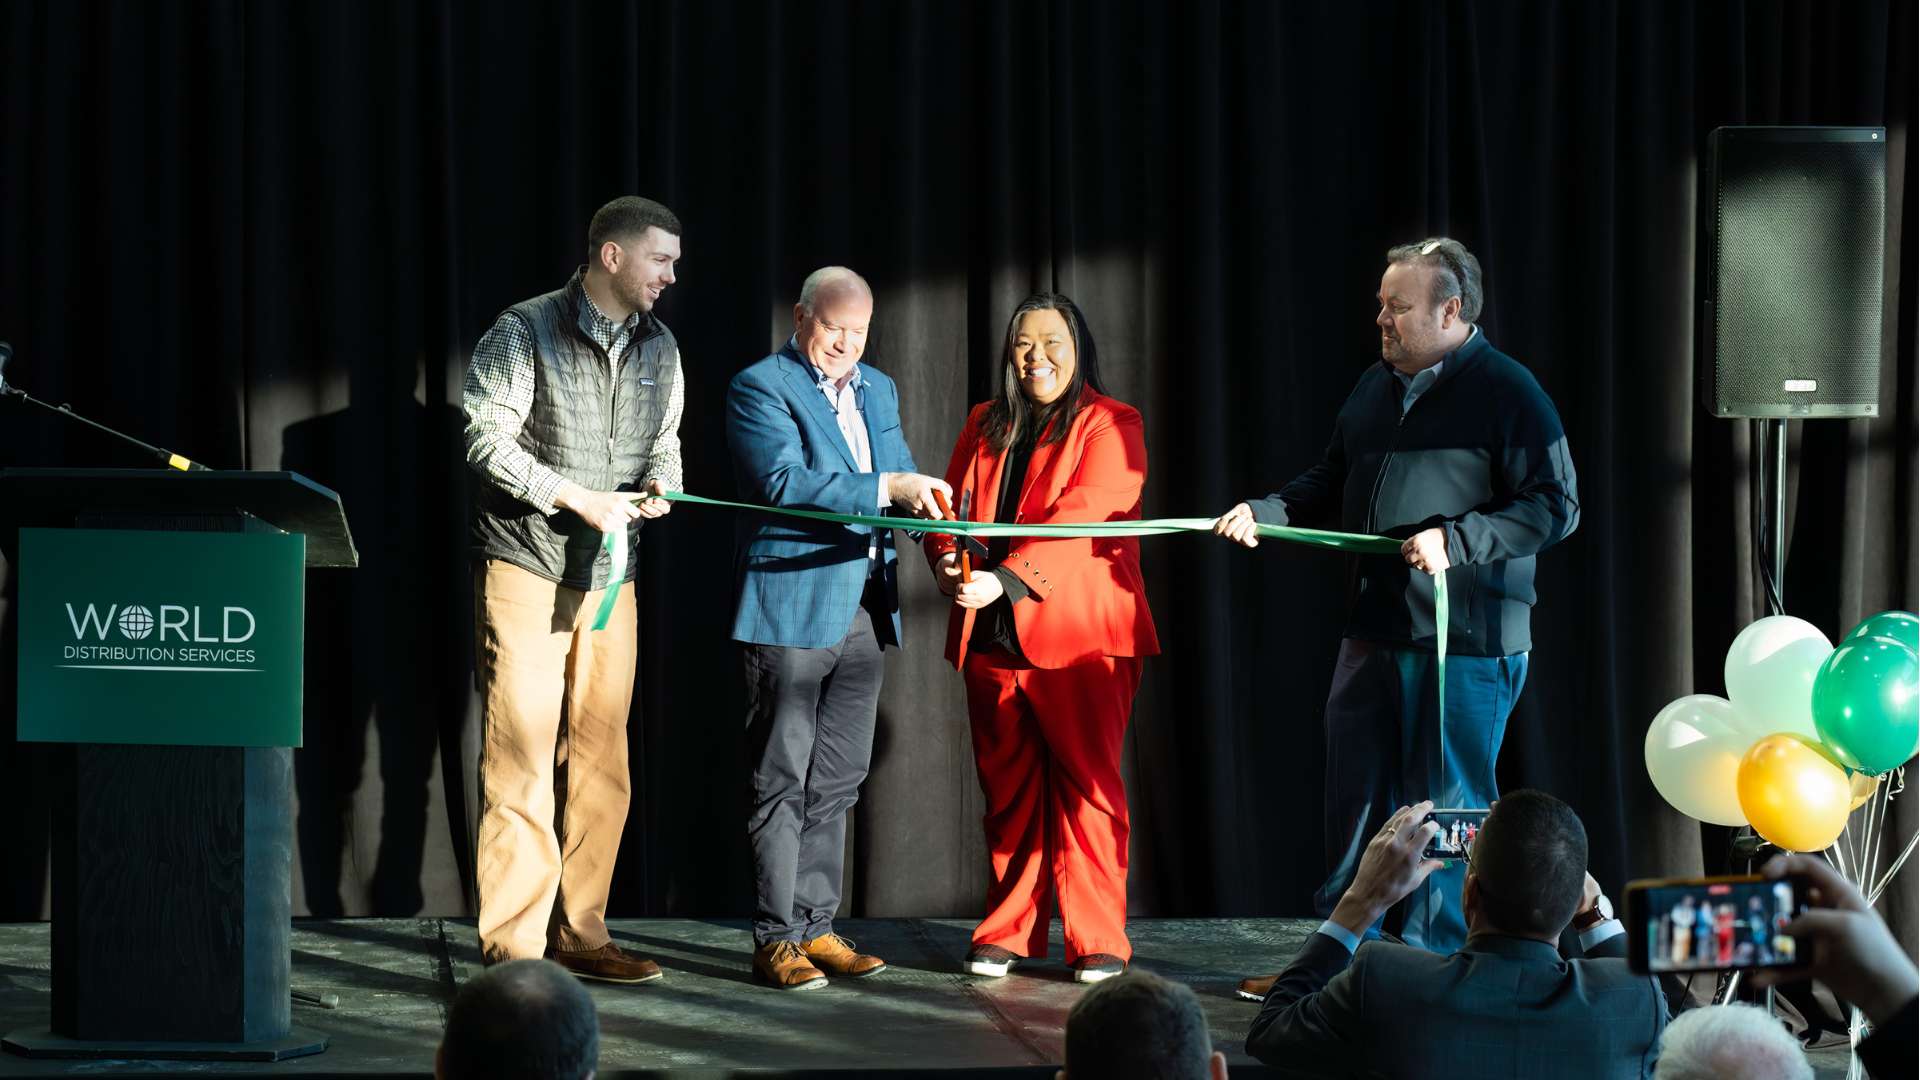 World Group Internal Communications Manager Kevin McClelland, Chairman Fred Hunger, NWSA Commissioner Kristin Ang, and UWL/WDS President Duncan Wright cut the ribbon to officially open the WDS Tacoma Distribution Center.